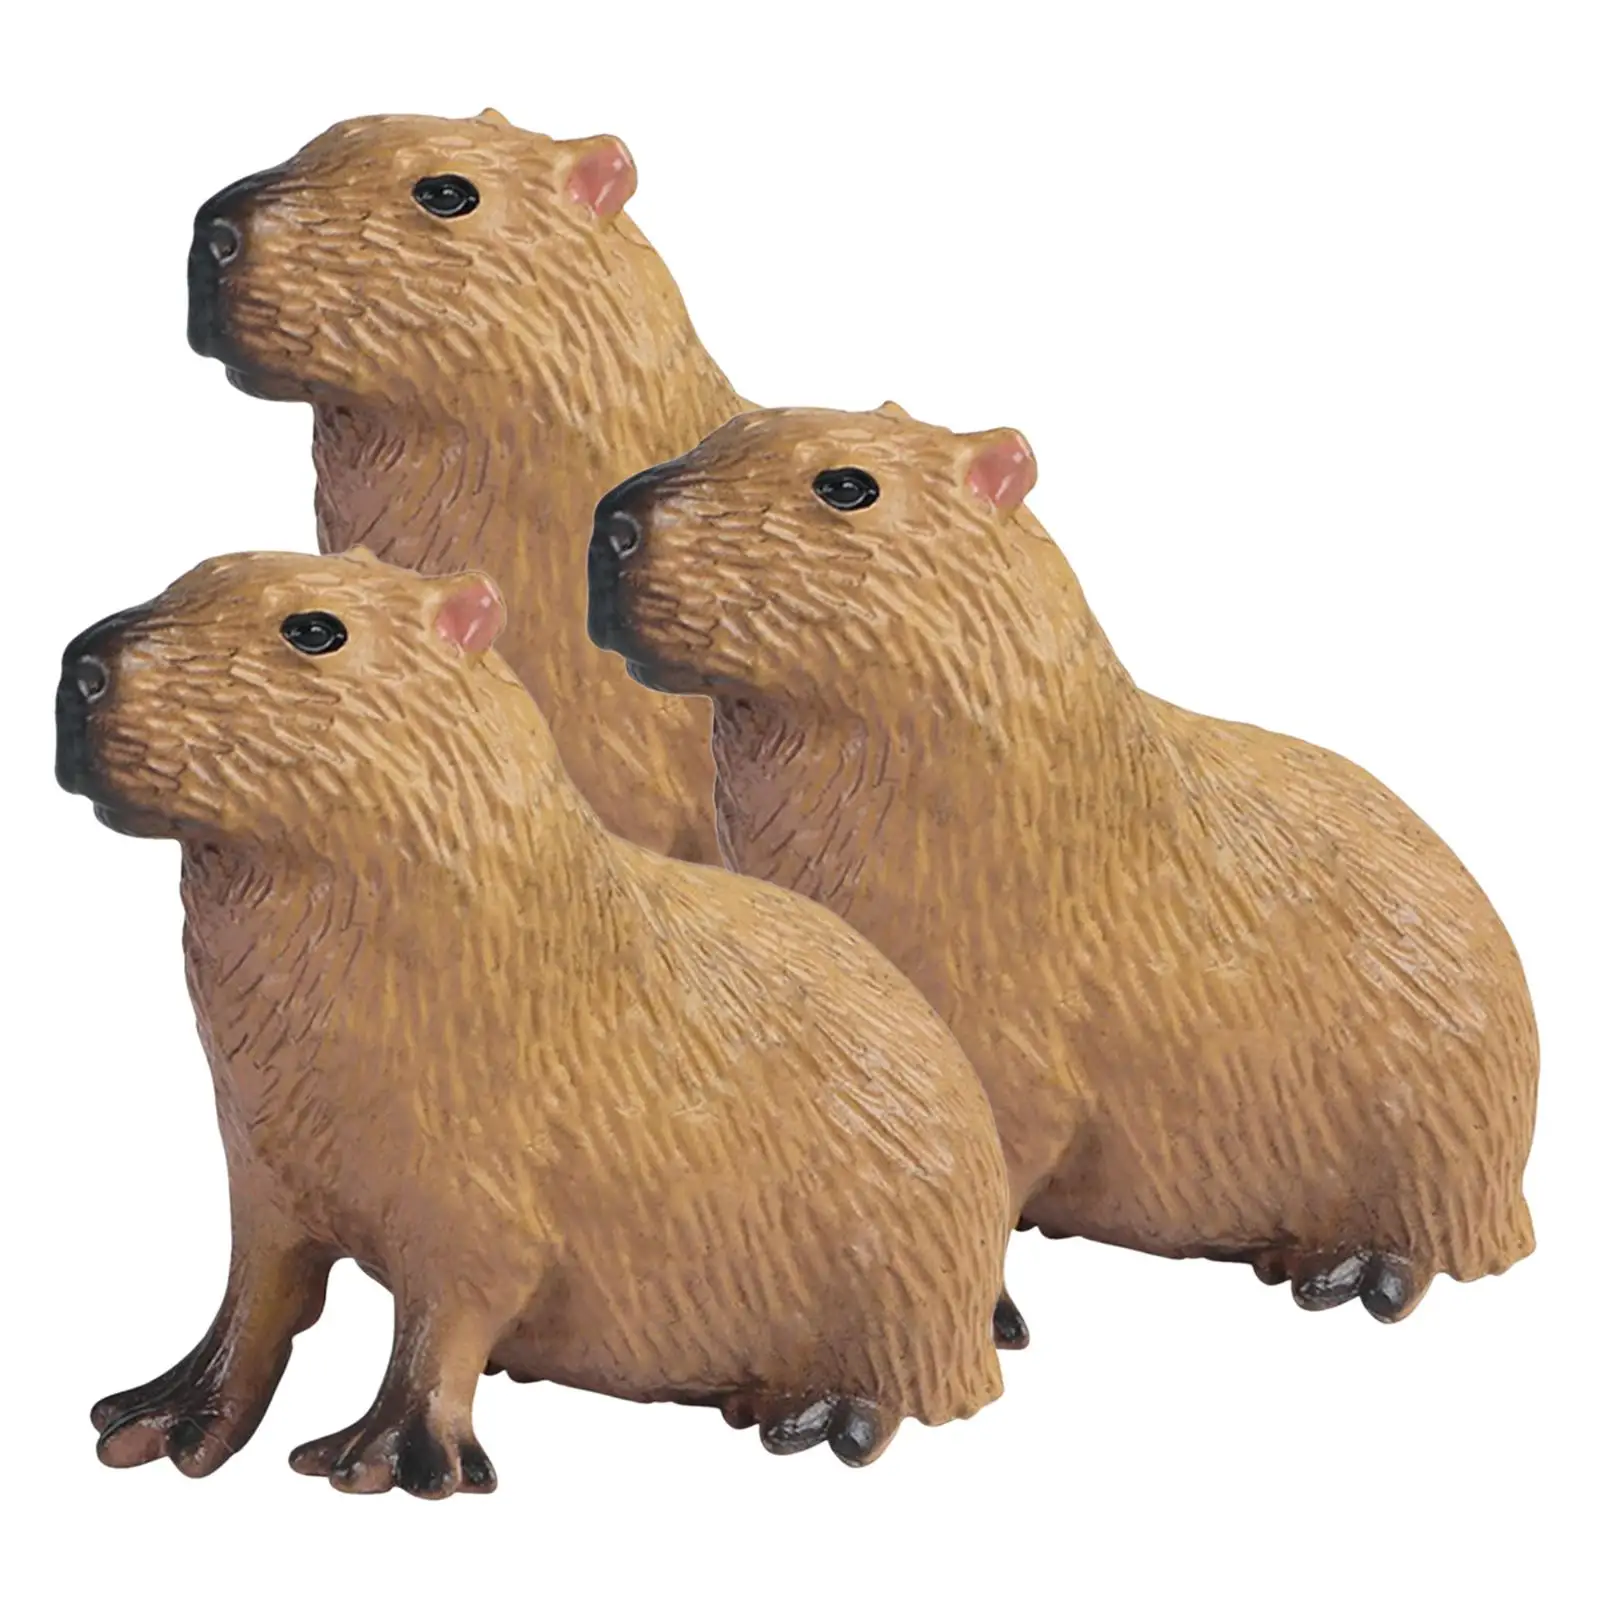 4x Capybara Figurines Toys Animals Model Playset for Home Ornaments Decor